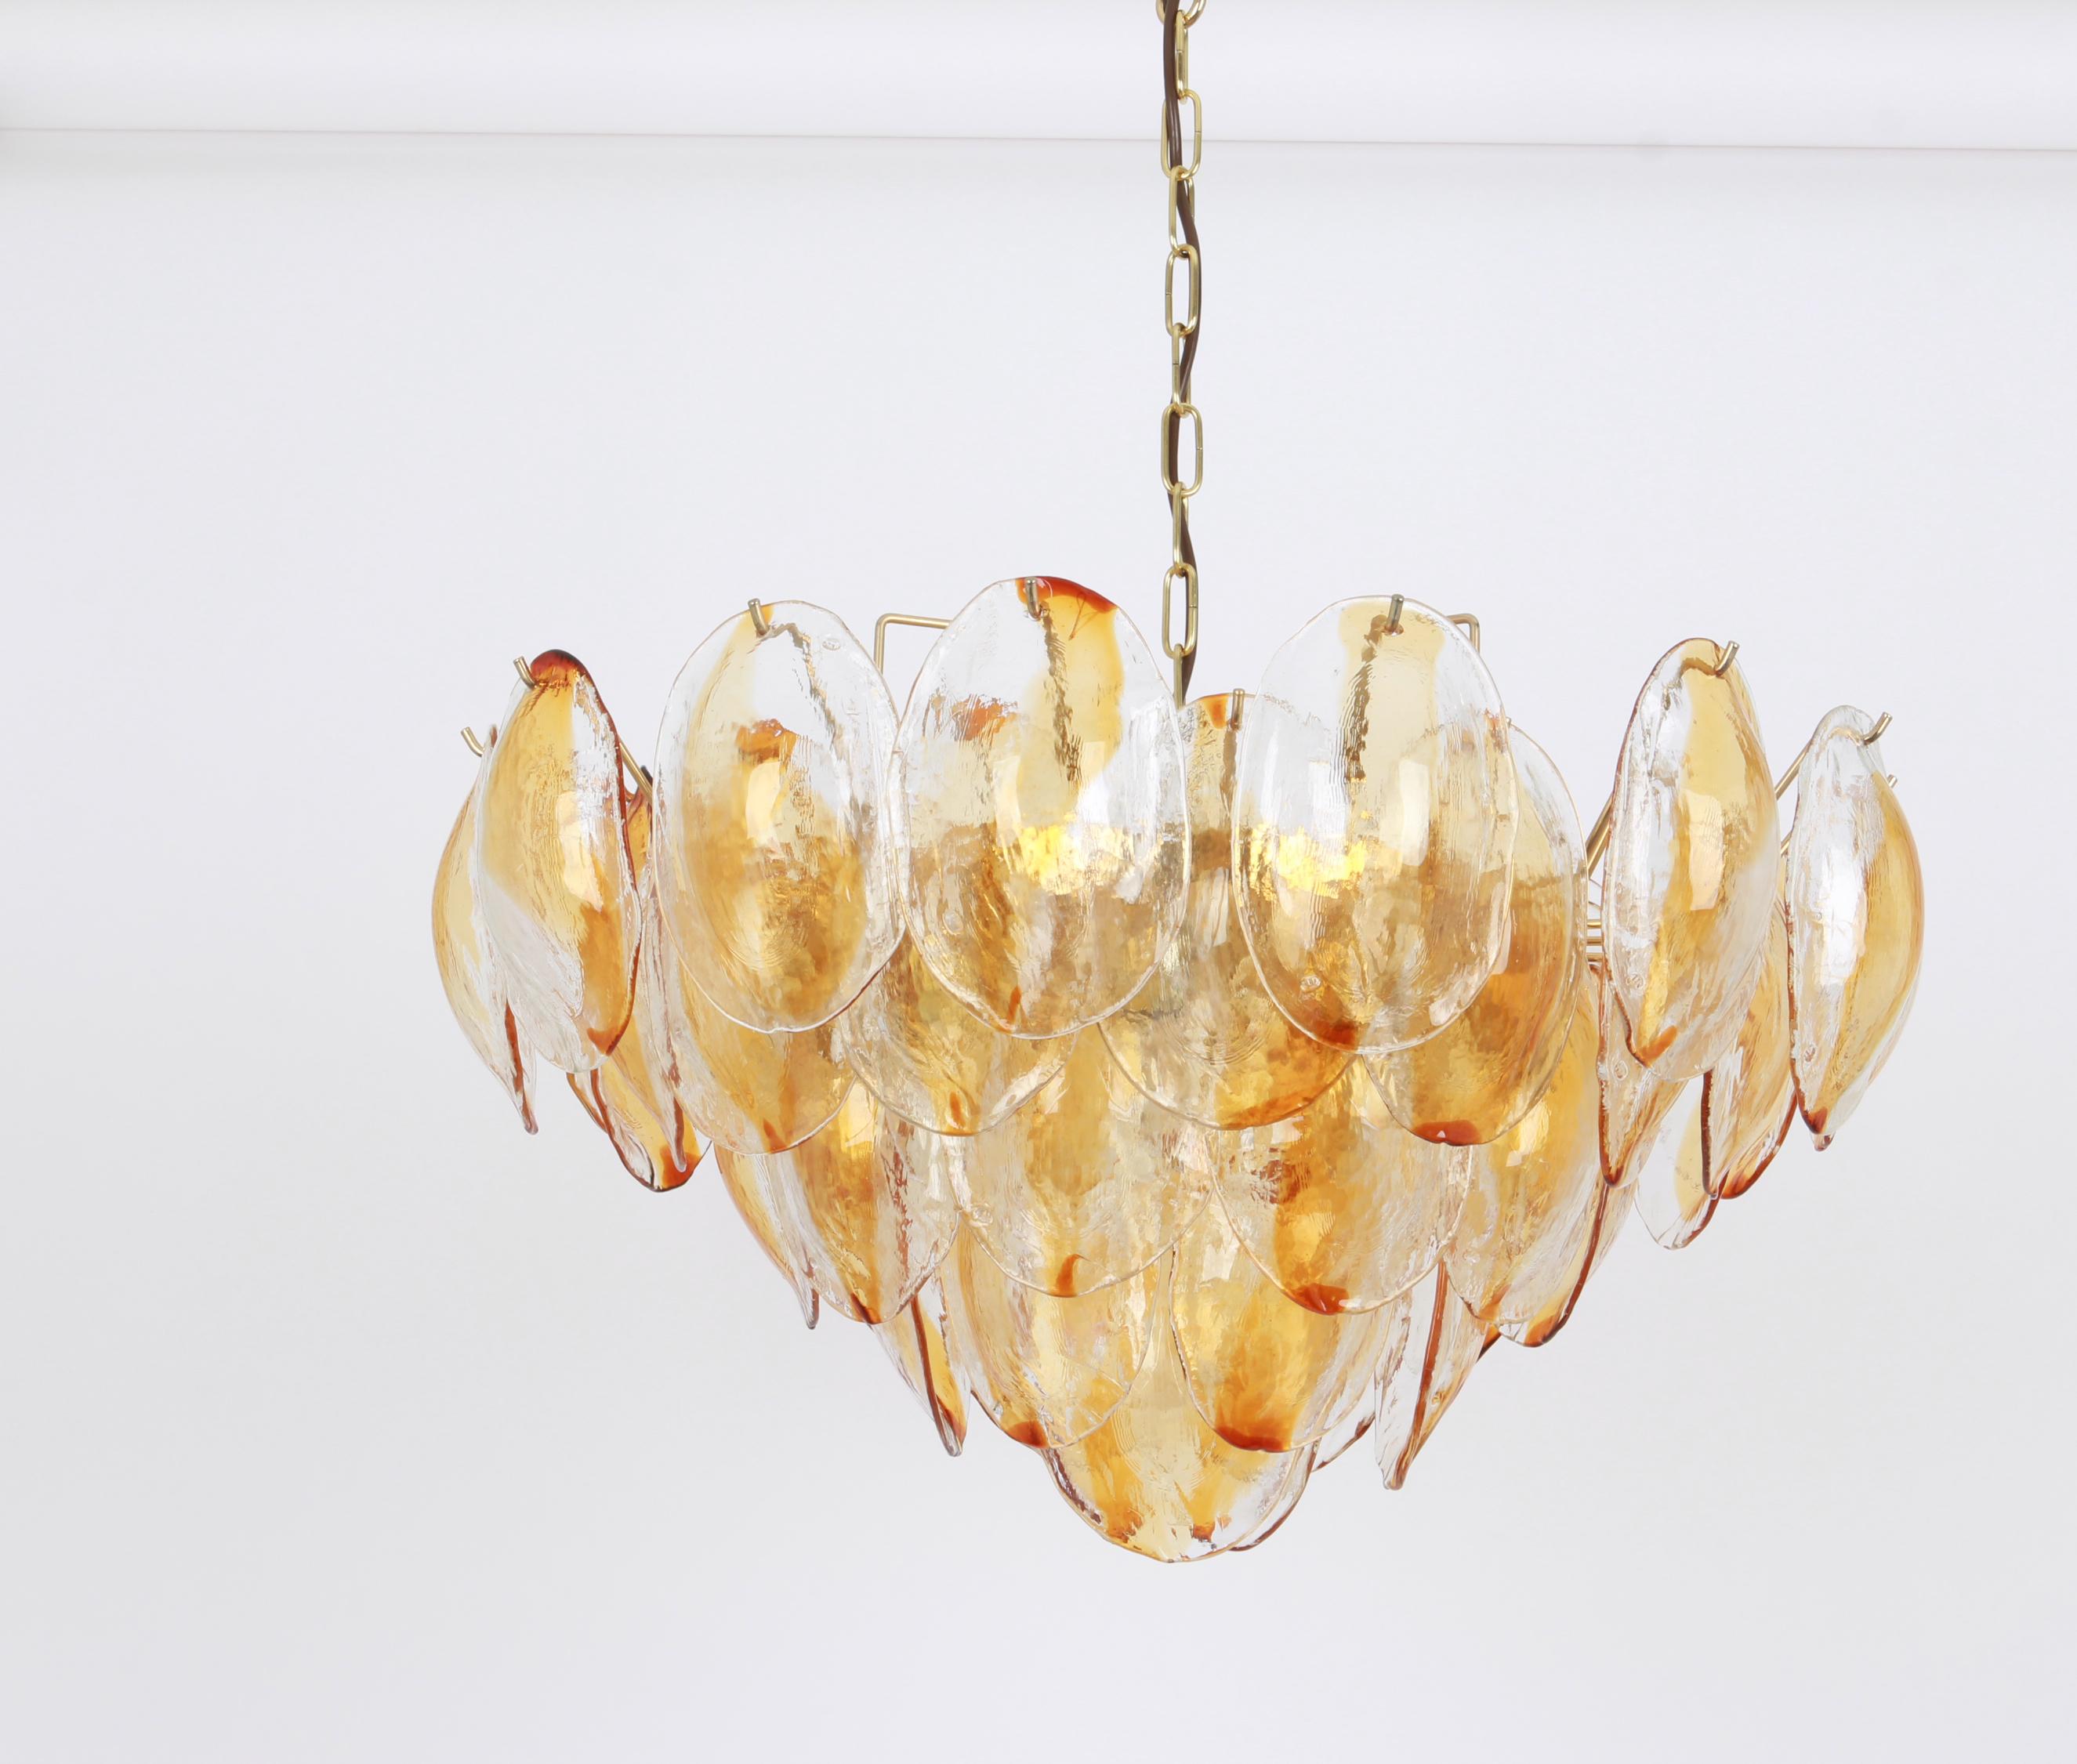 Stunning Murano glass chandelier by Mazzega, 1970s

Five tiers structure gathering many glasses in the form of leaves hang on a gold-color frame, beautifully refracting the light.

High quality and in very good condition with minor signs of use